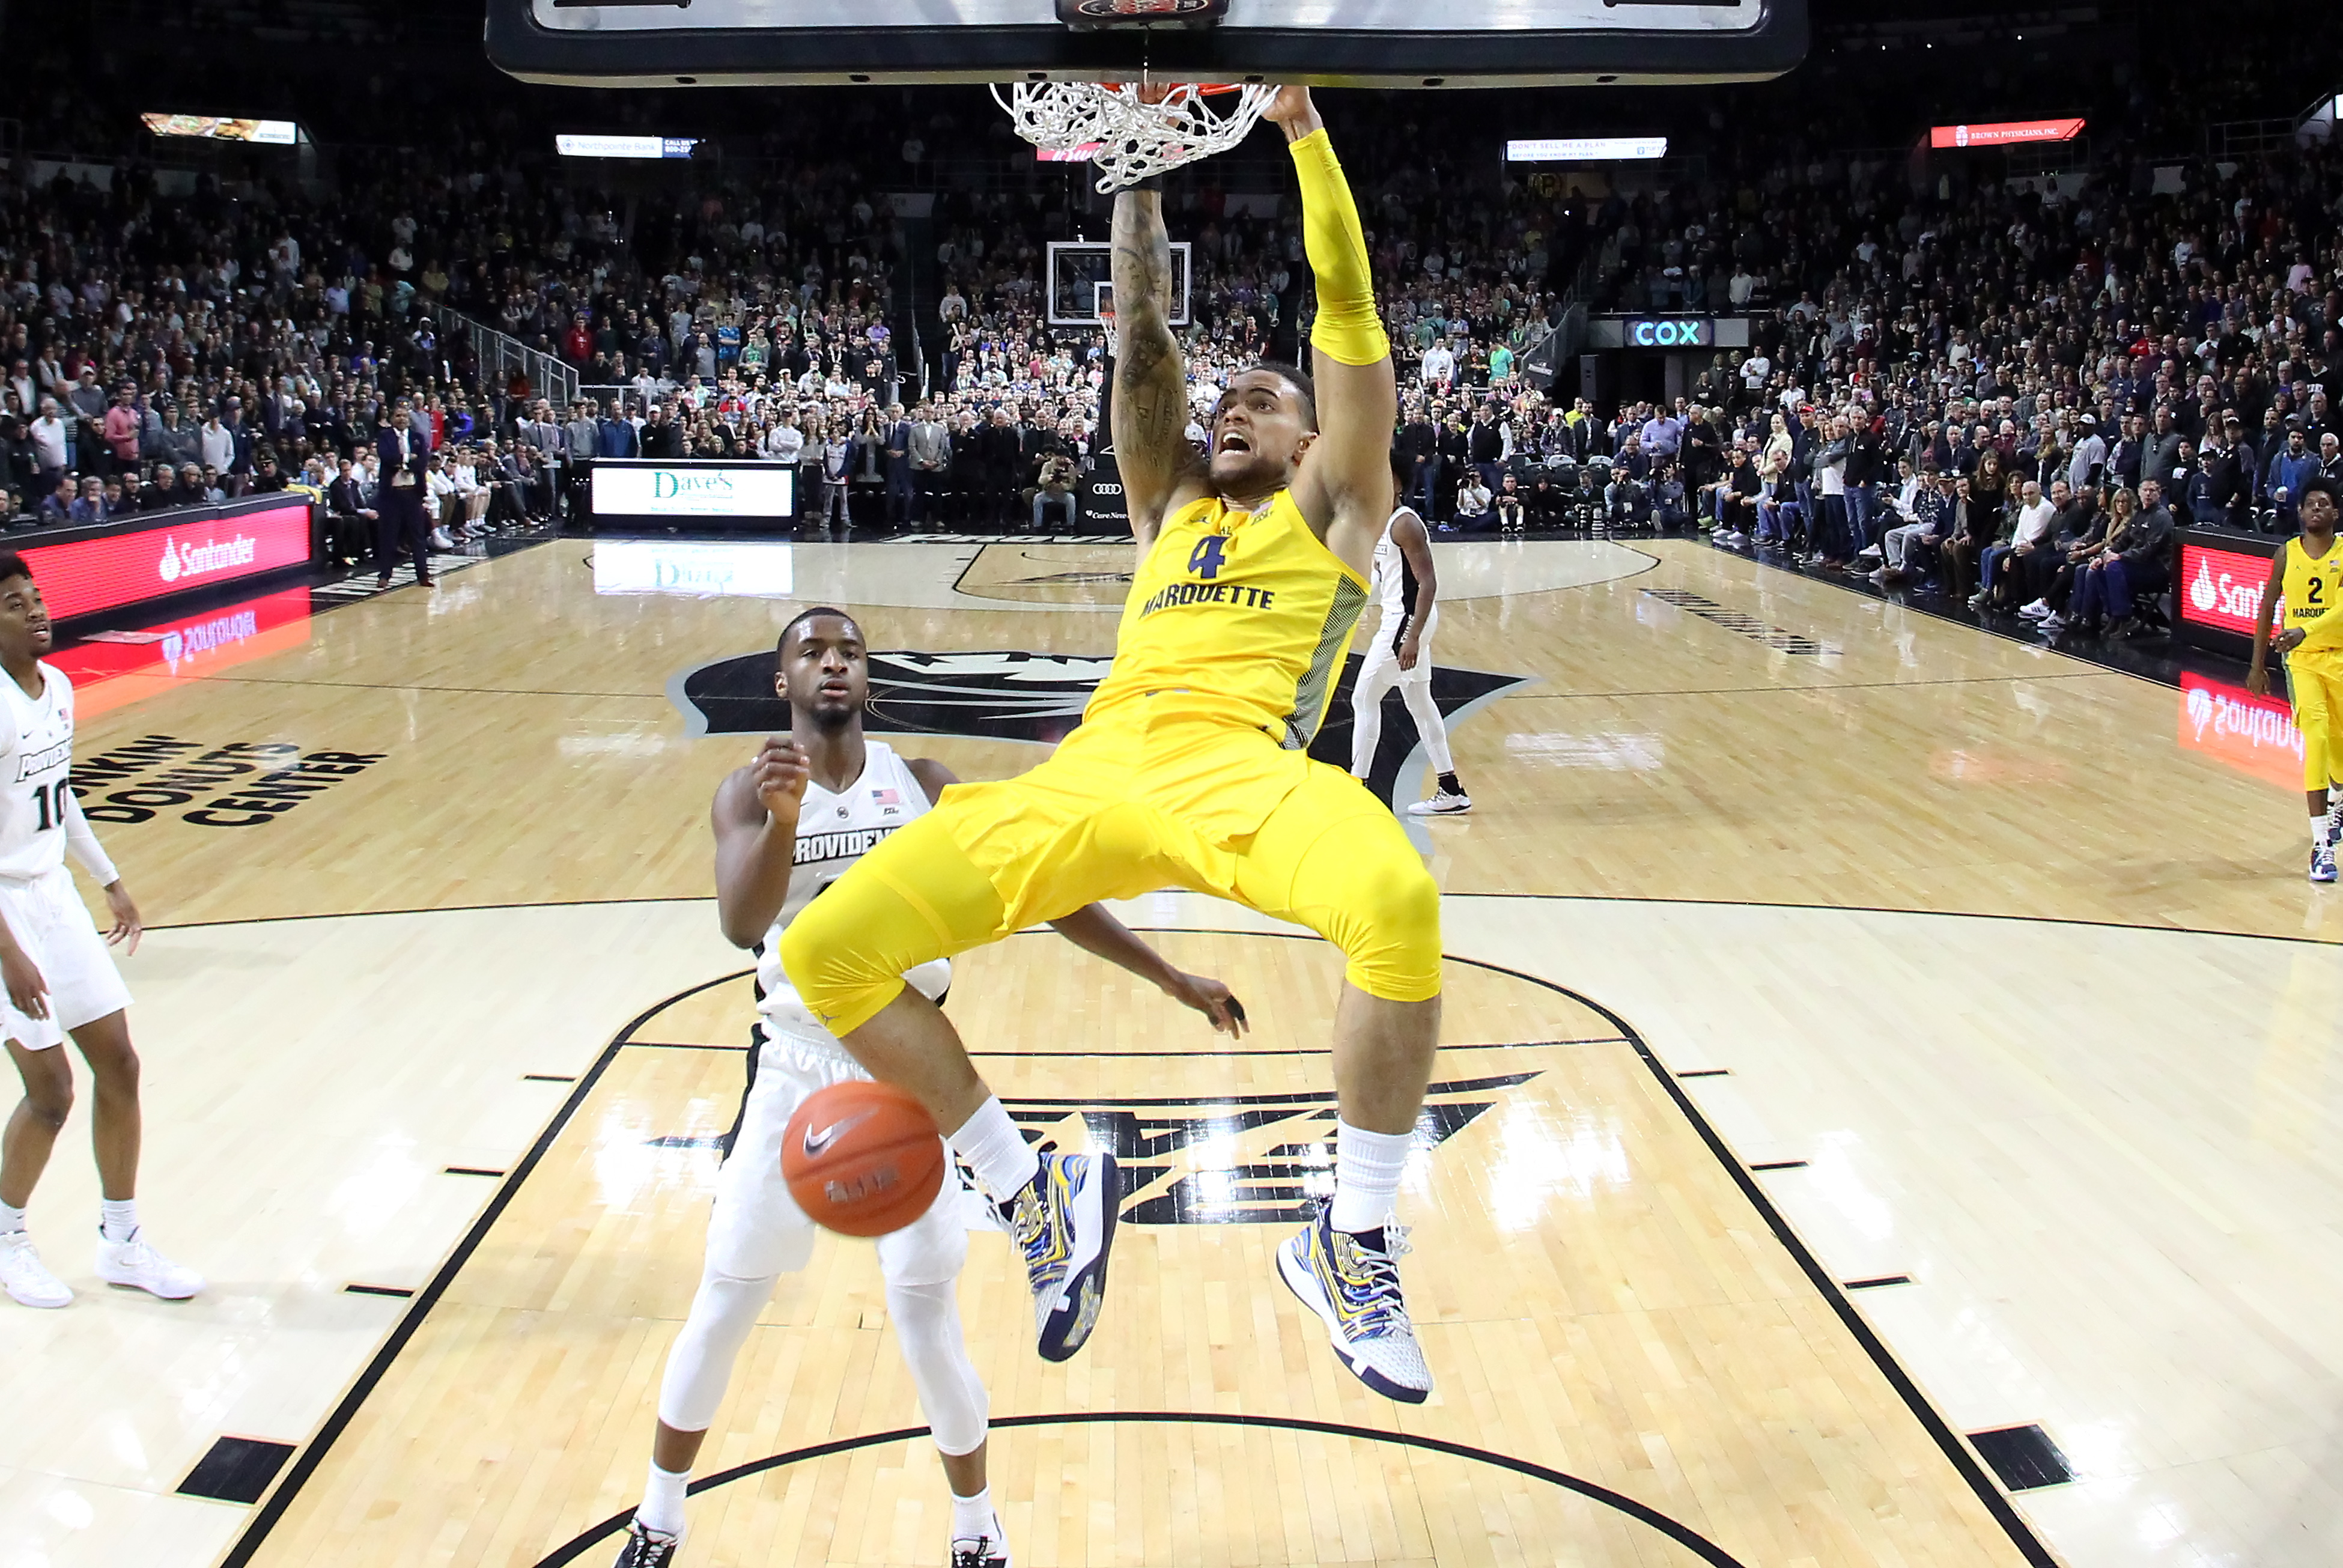 COLLEGE BASKETBALL: FEB 22 Marquette at Providence